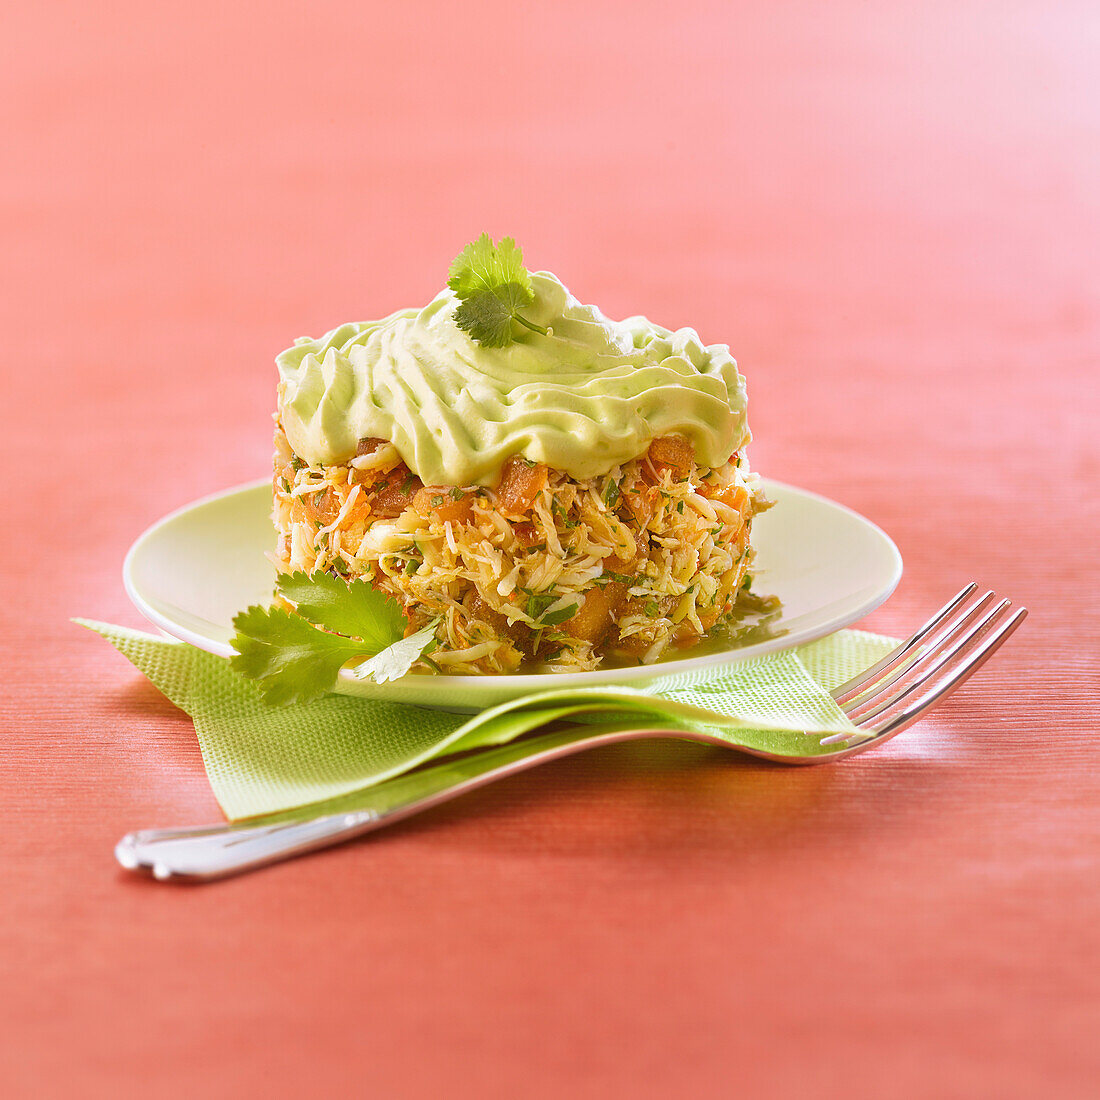 Crab salad with avocado whipped cream